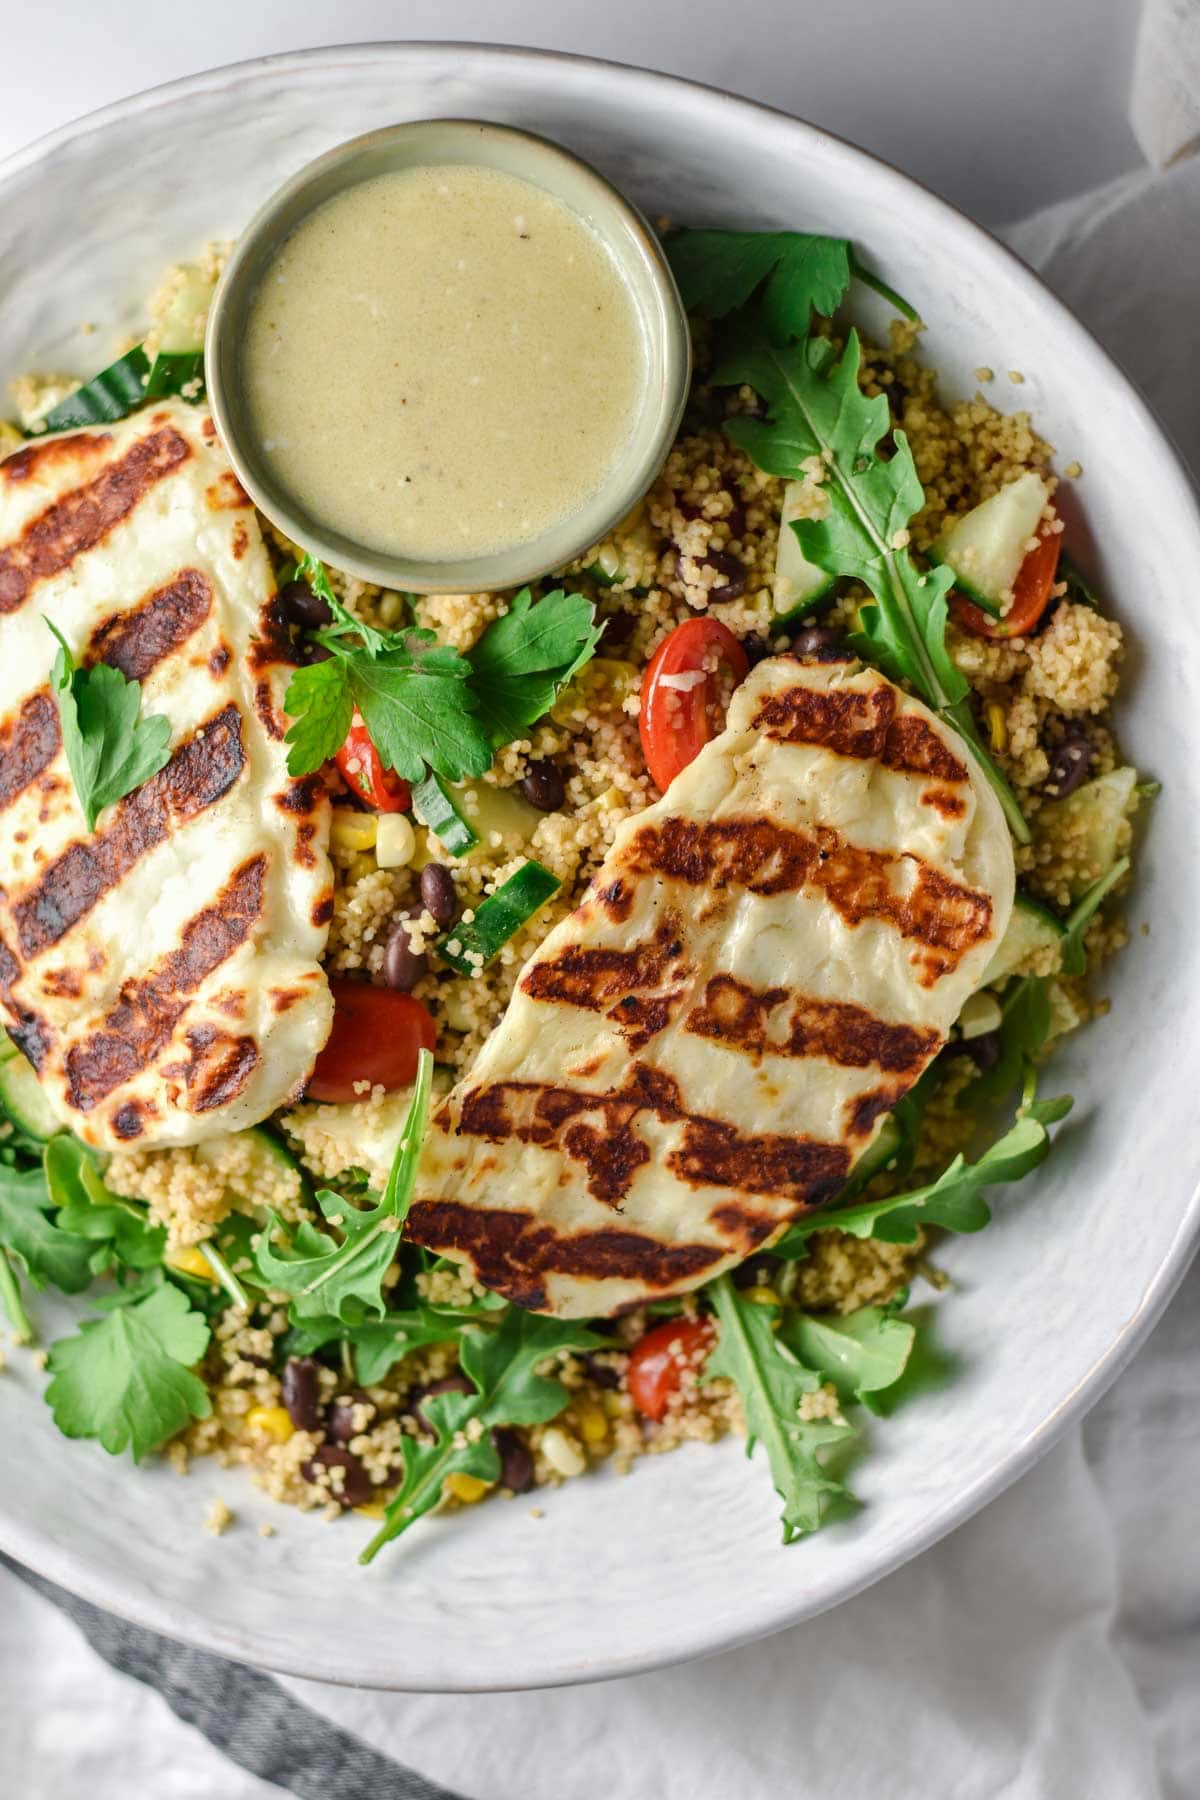 Grilled halloumi on greens with a vinaigrette dressing.